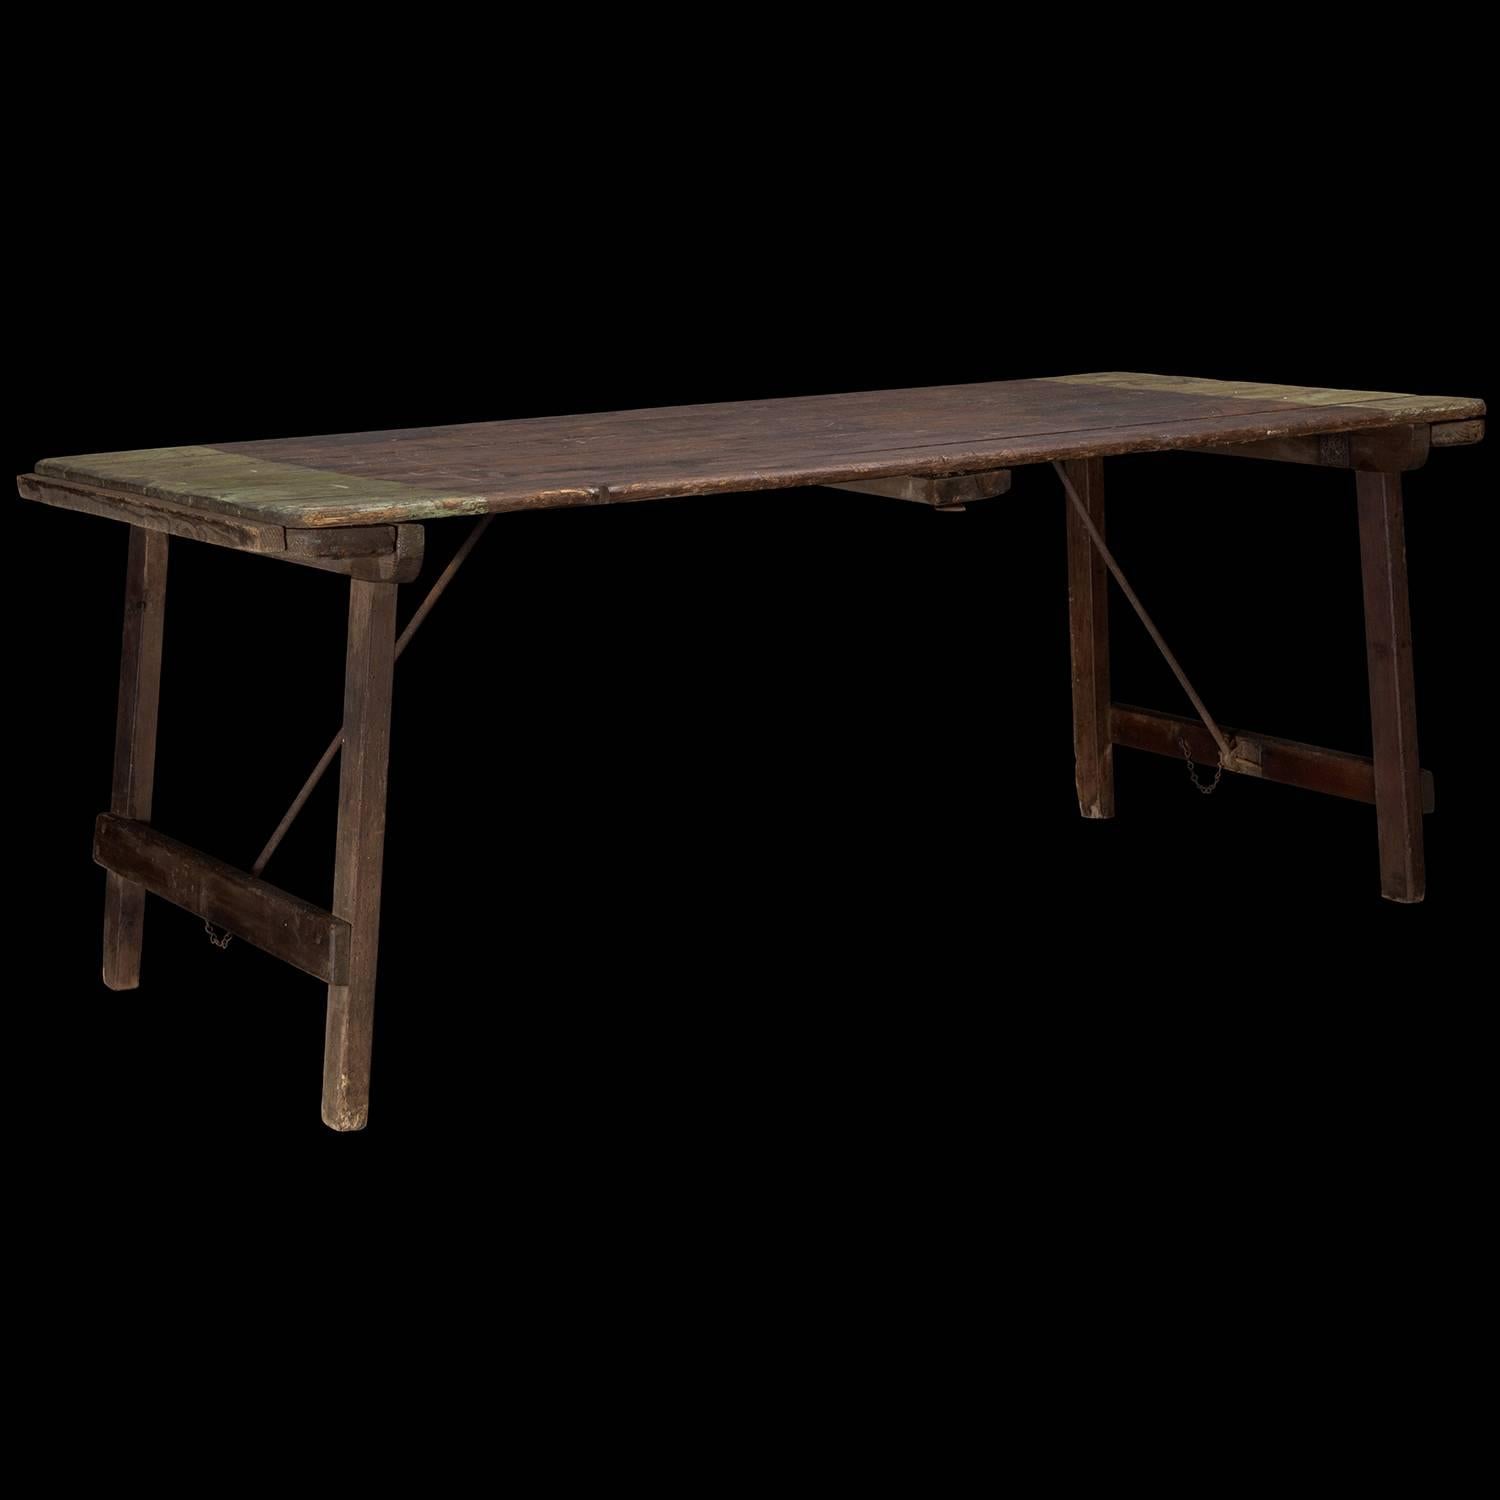 Victorian folding table with original iron states and period painted stripes.